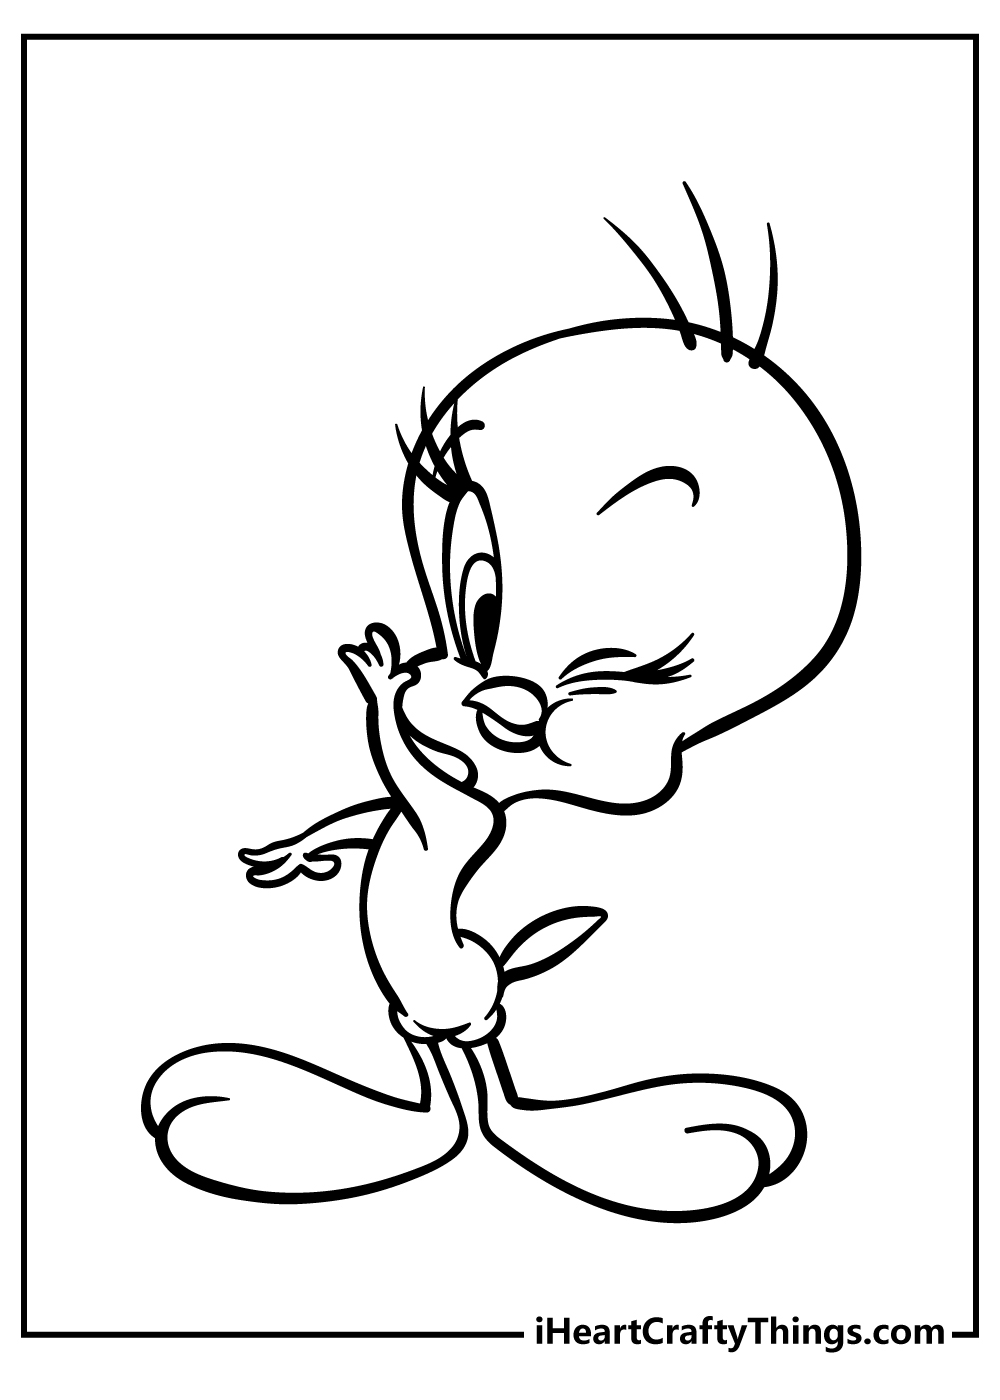 Looney Tunes Coloring Sheet for children free download